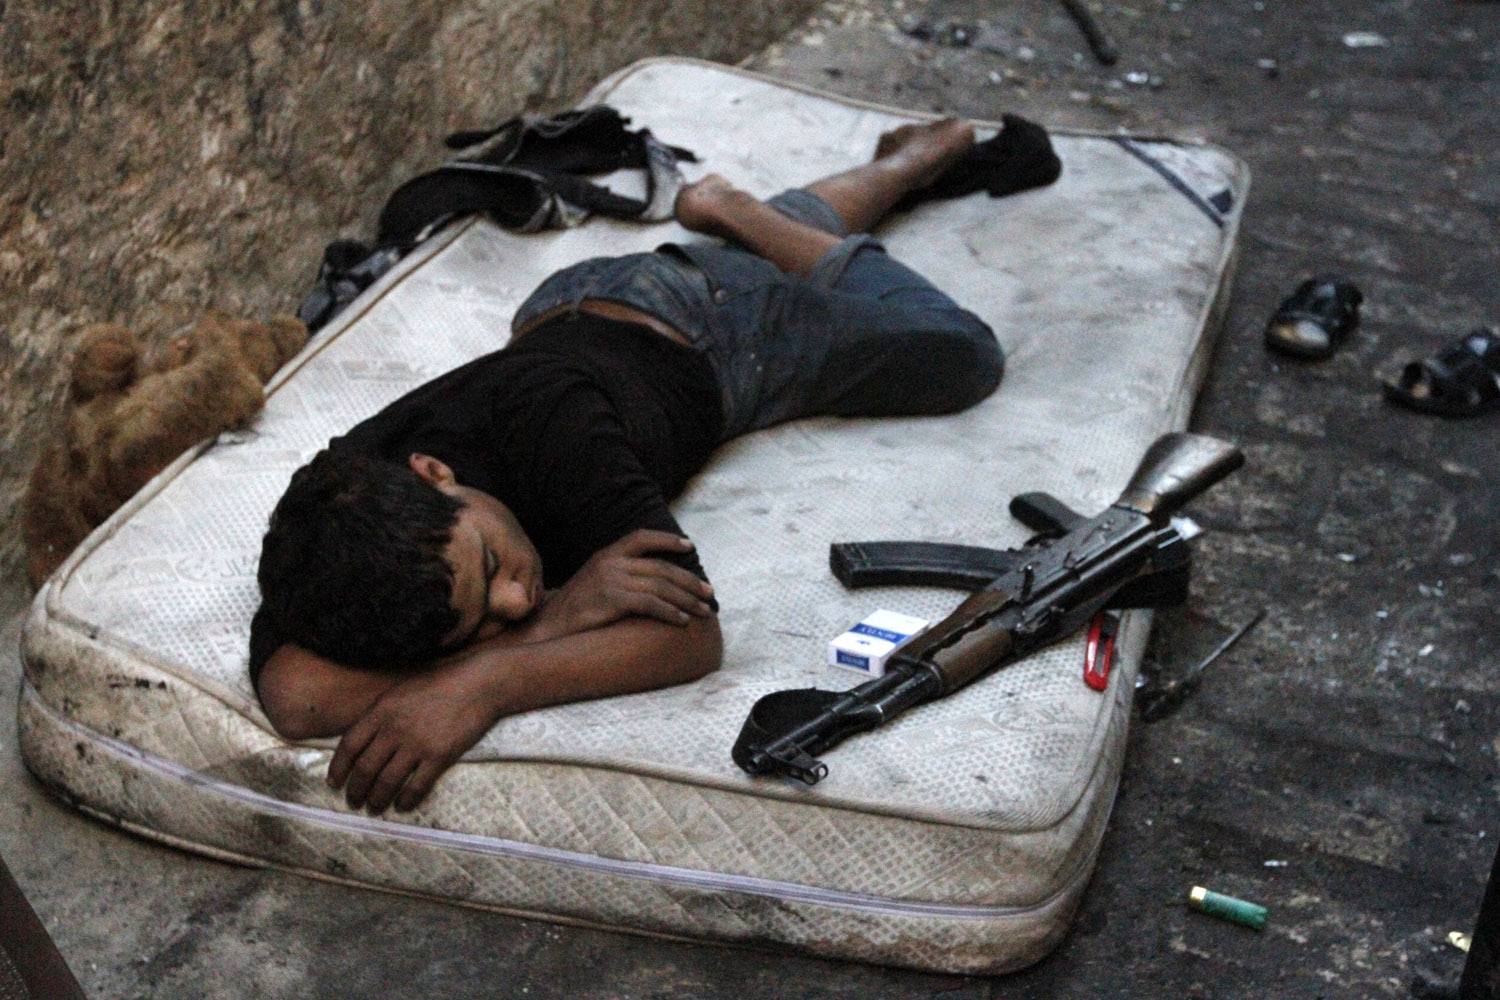 A young Free Syrian Army fighter sleeps on a mattress in the old city of Aleppo